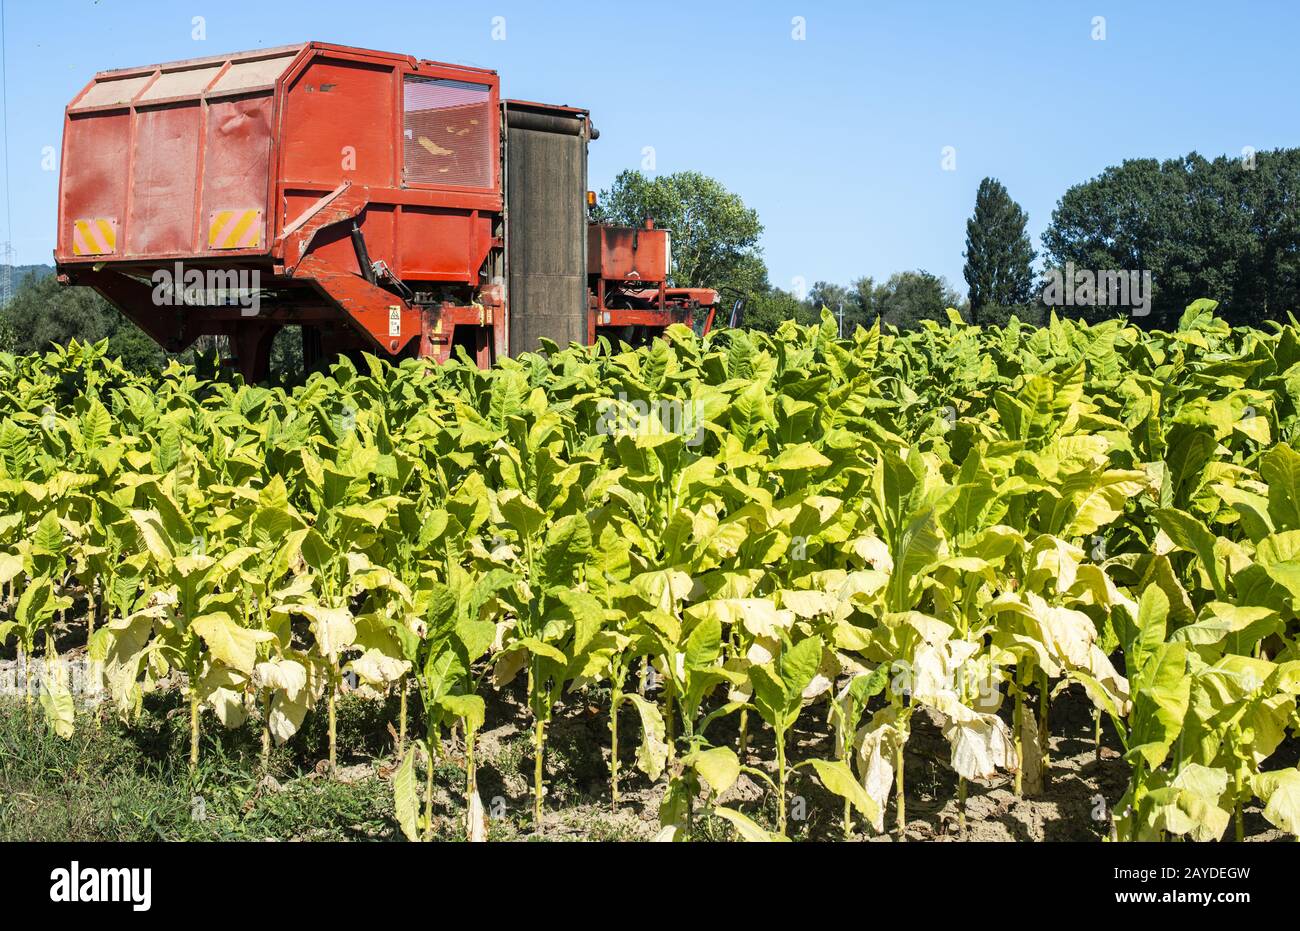 Harvesting tobacco leaves with harvester tractor Stock Photo